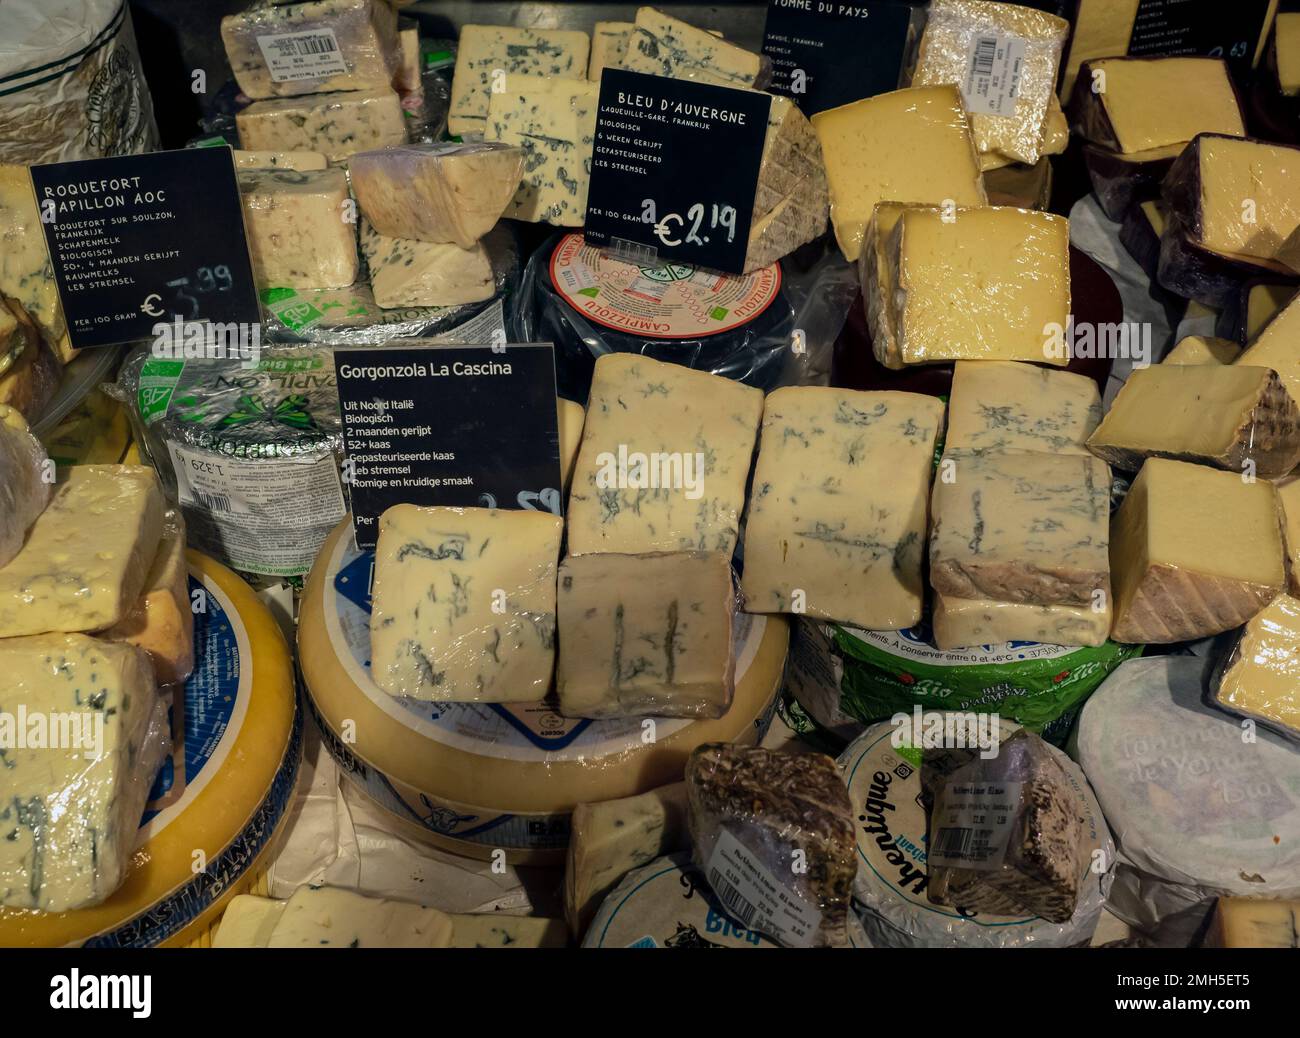 AMSTERDAM, NETHERLANDS - MAY 01, 2018:  Display of cheese in a cheese shop with price labels Stock Photo